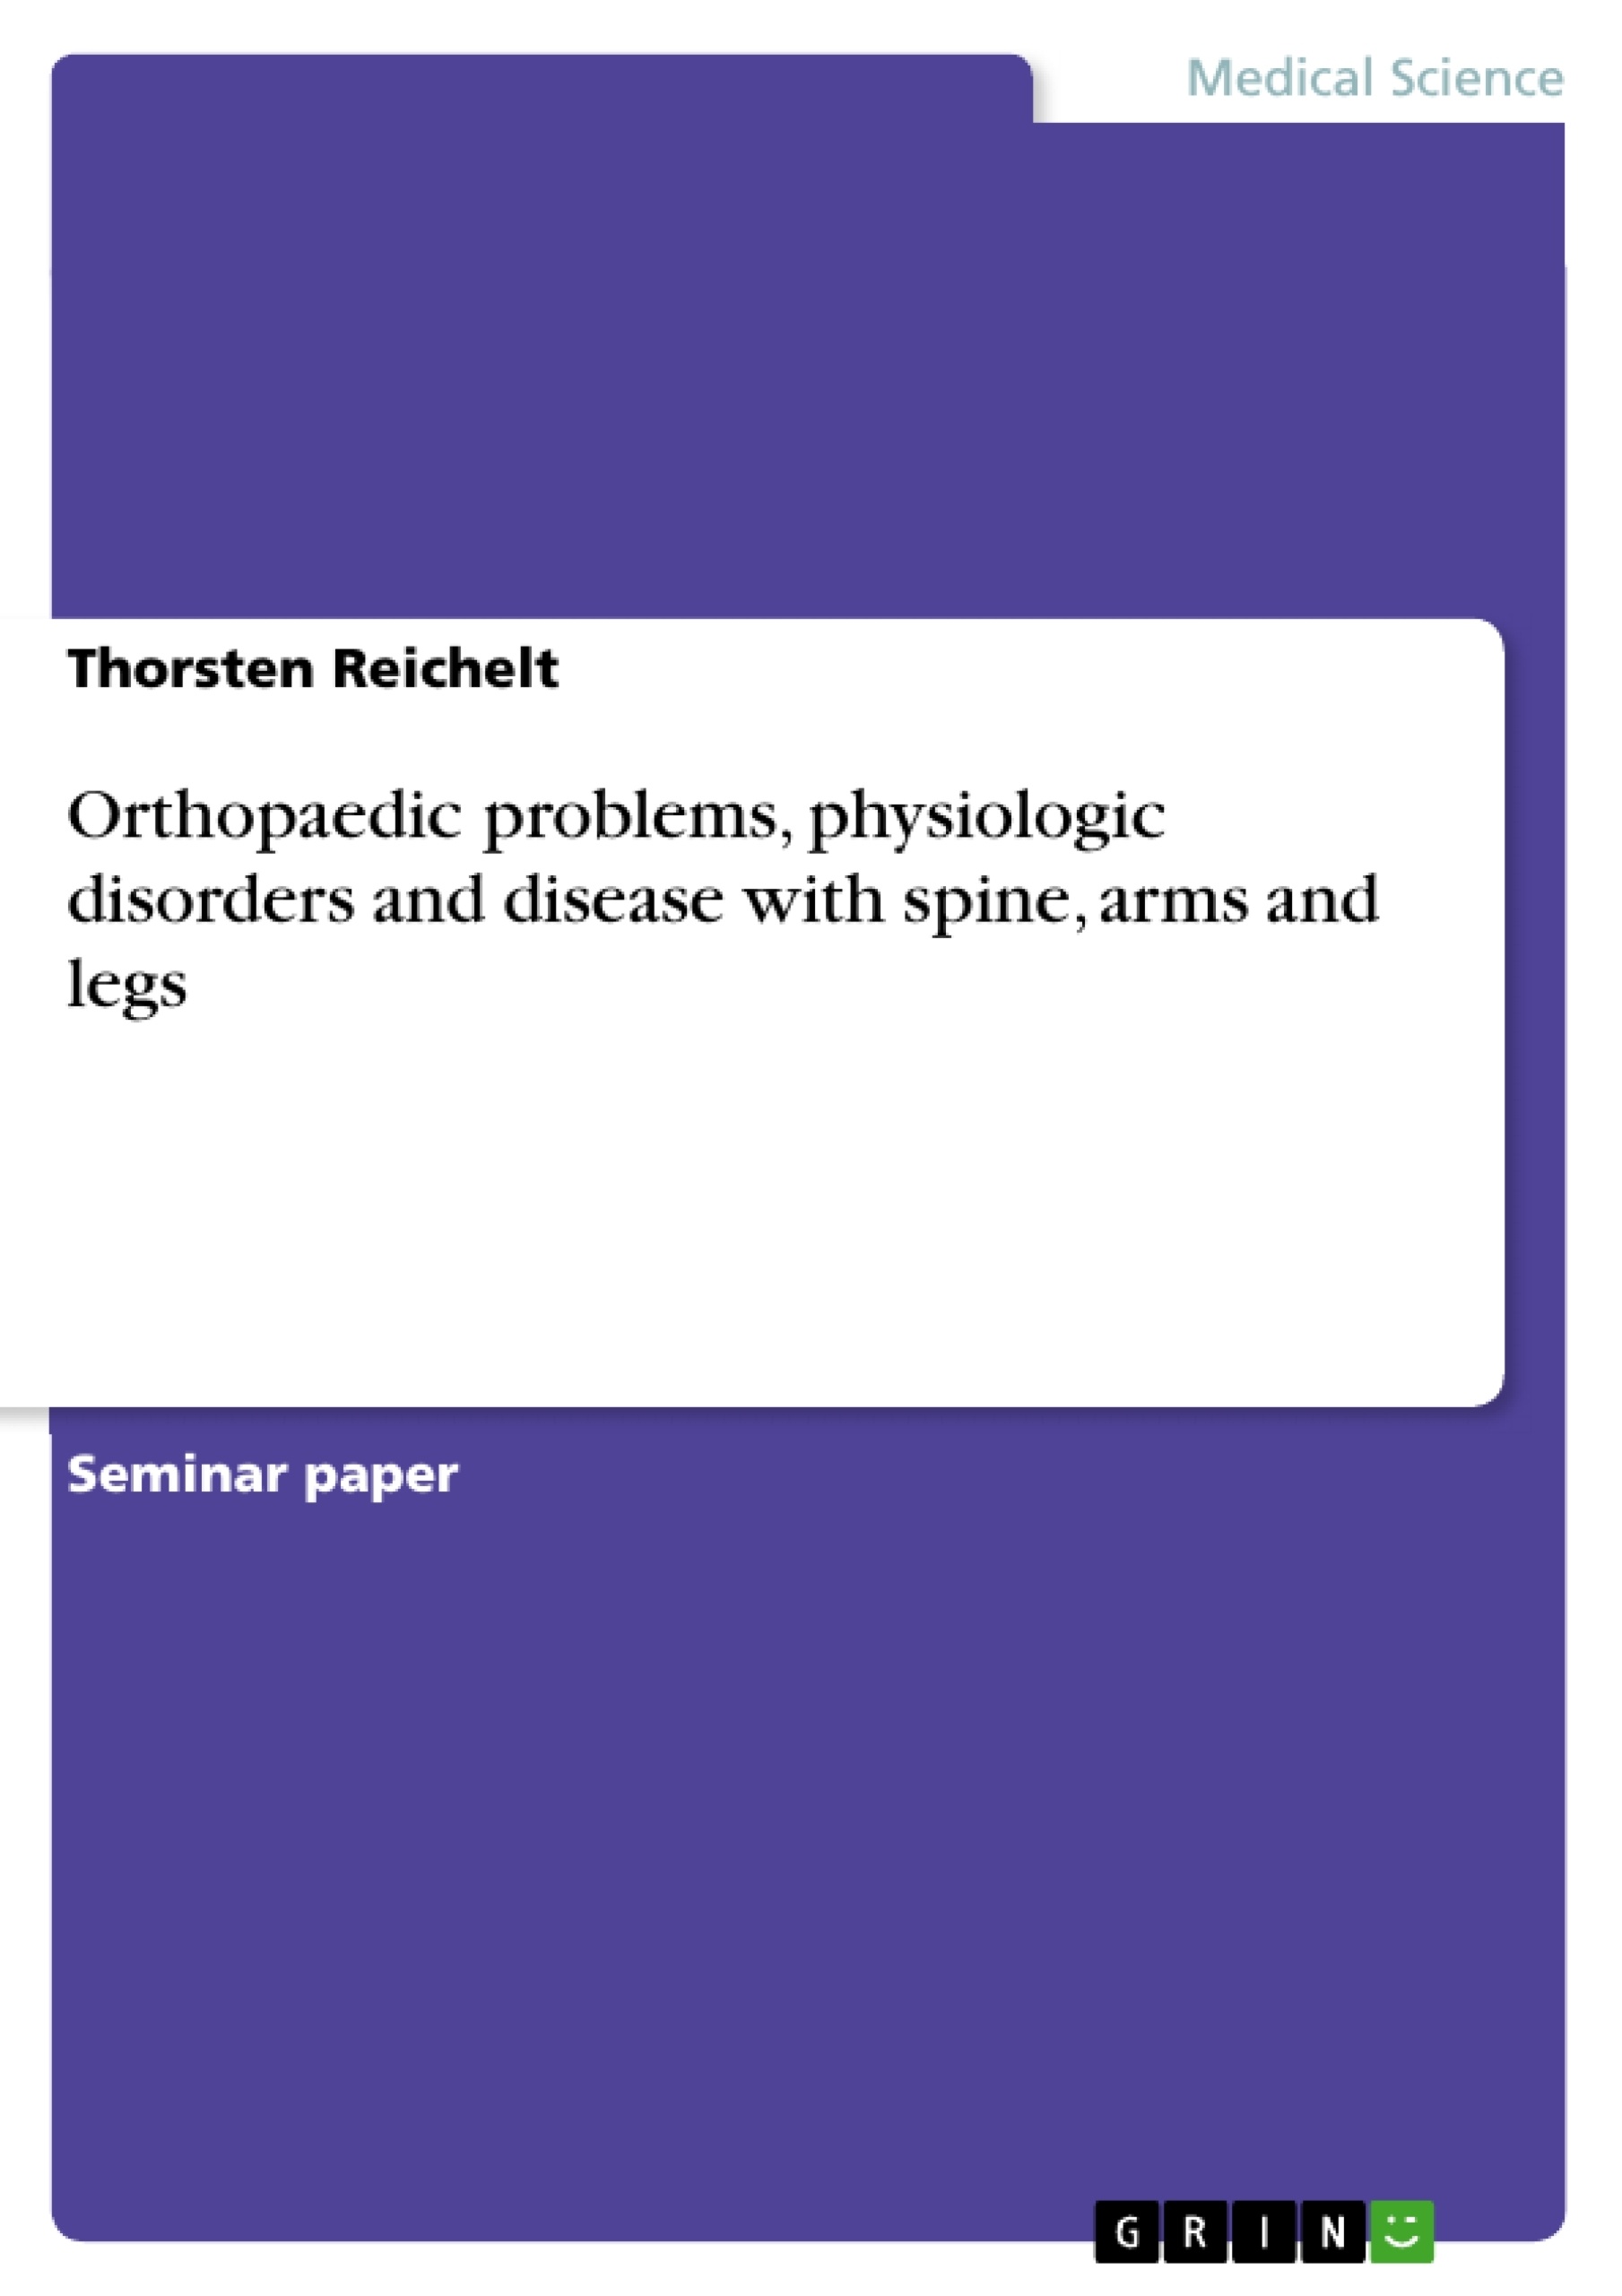 Titre: Orthopaedic problems, physiologic disorders and disease with spine, arms and legs